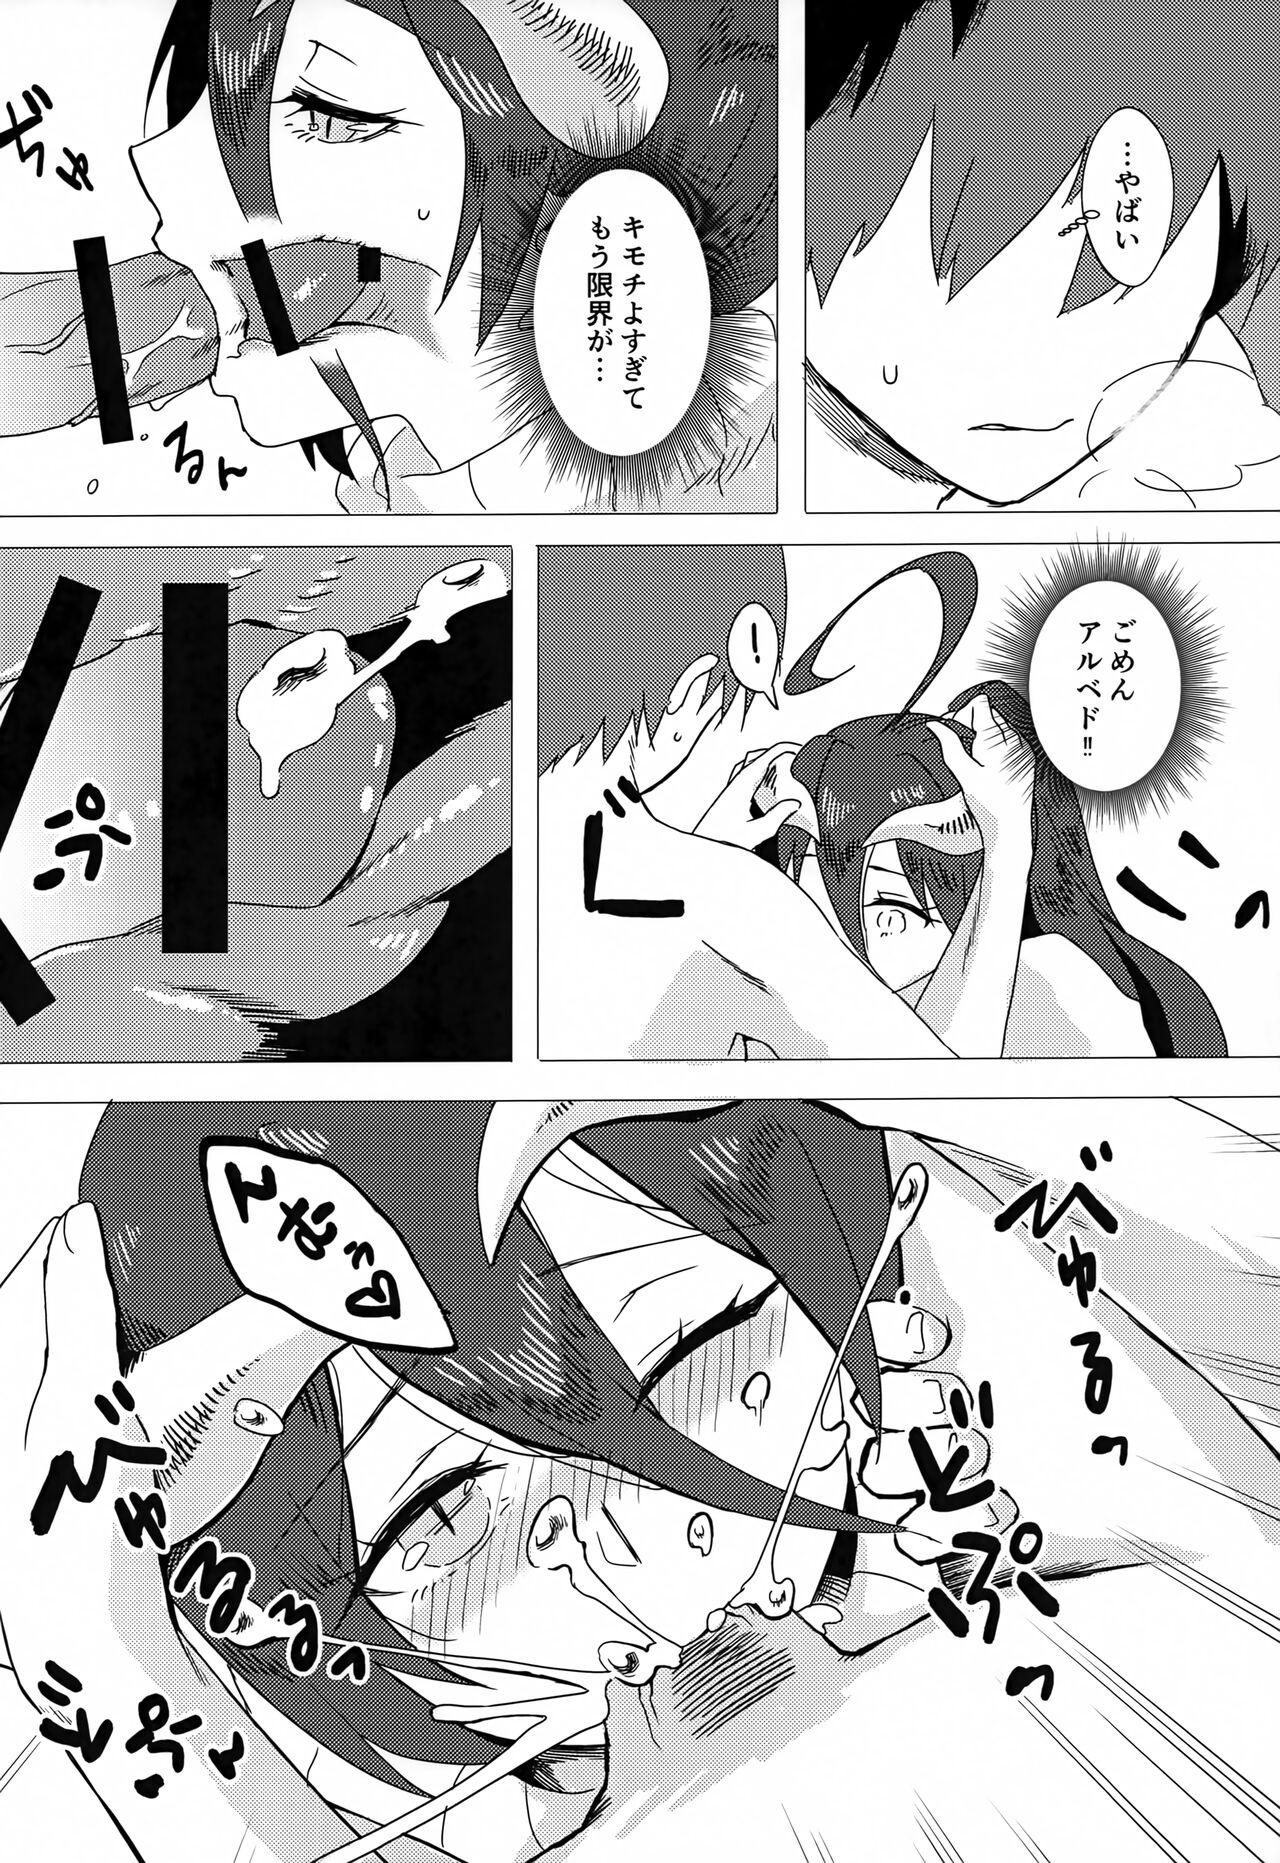 Strap On Albedo-san to! 2 - Overlord Long Hair - Page 11